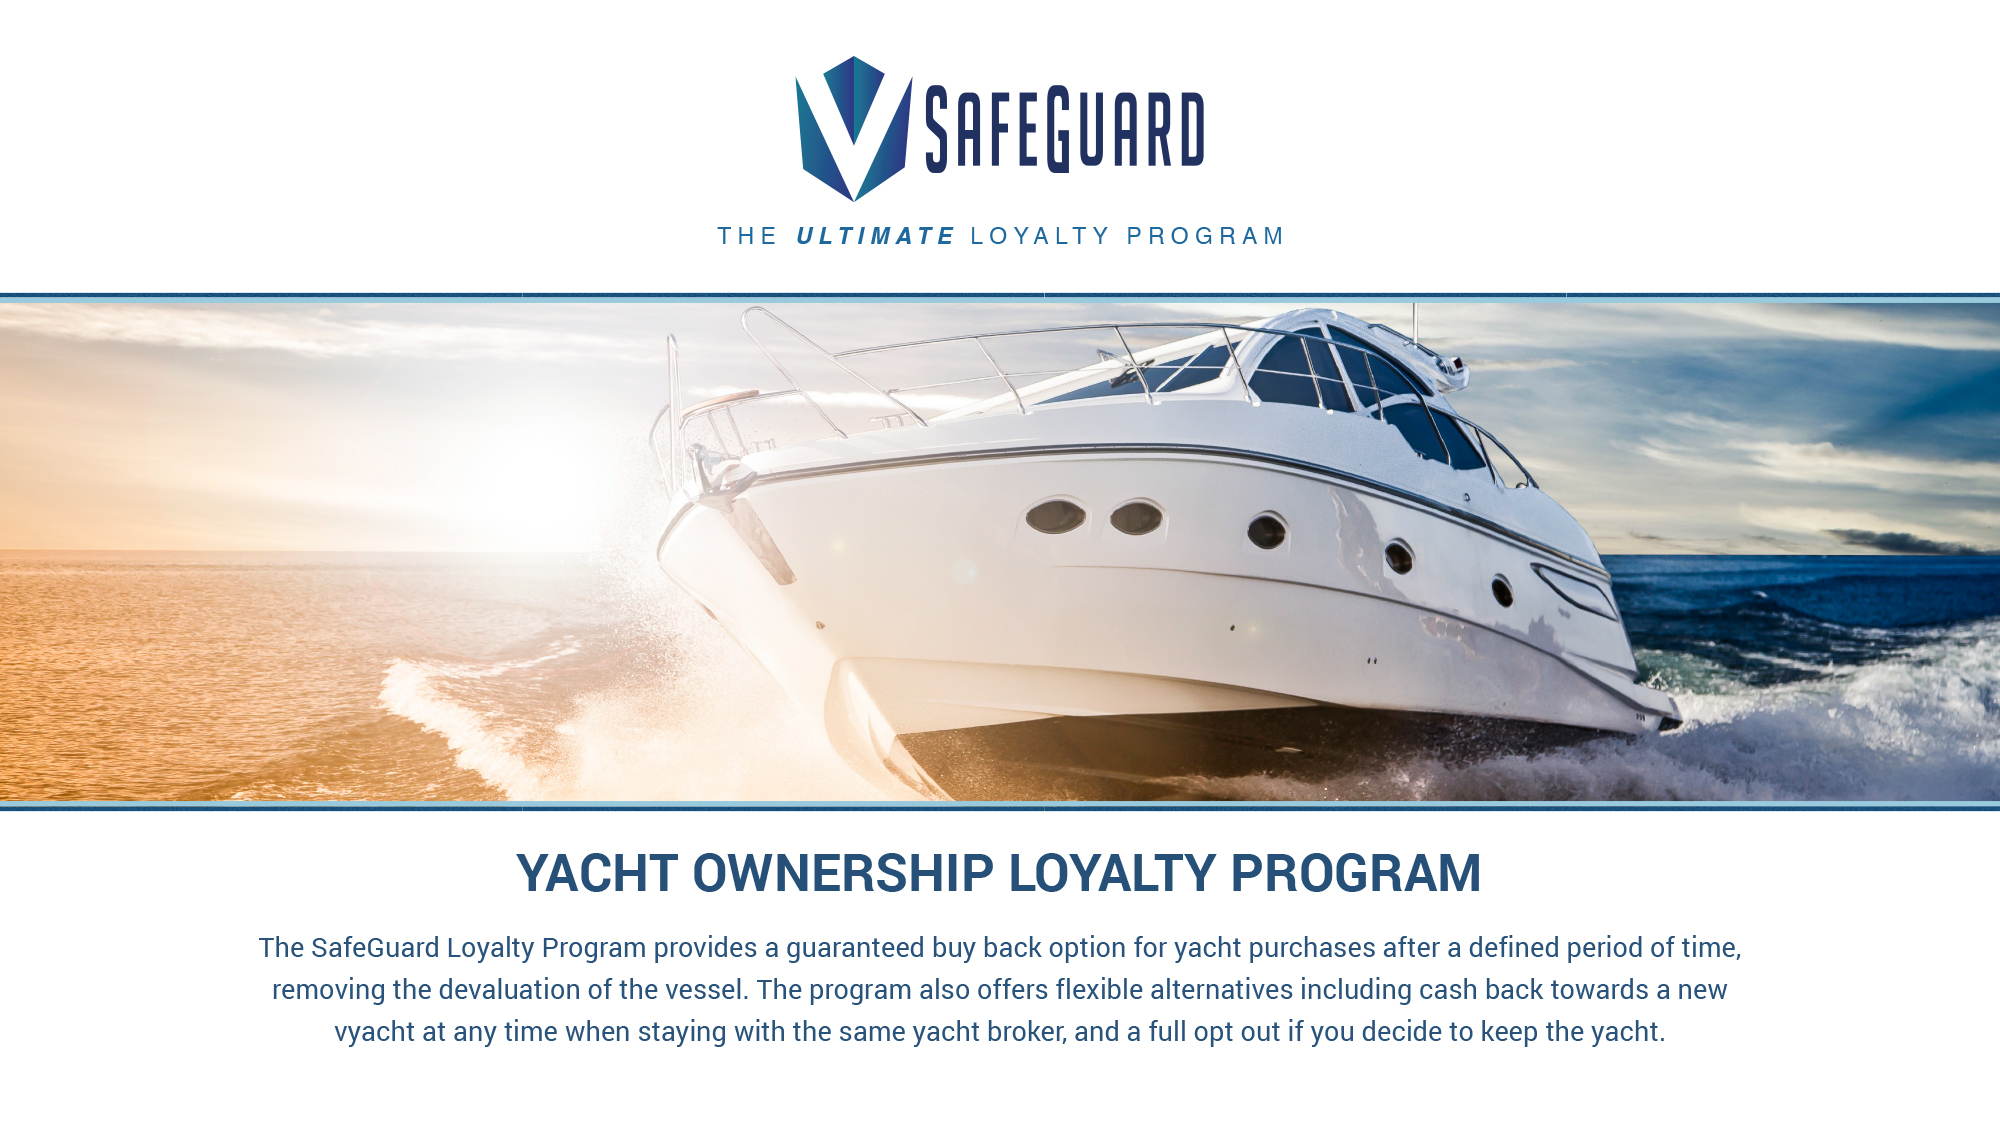 SafeGuard Loyalty Program for Yacht Ownership